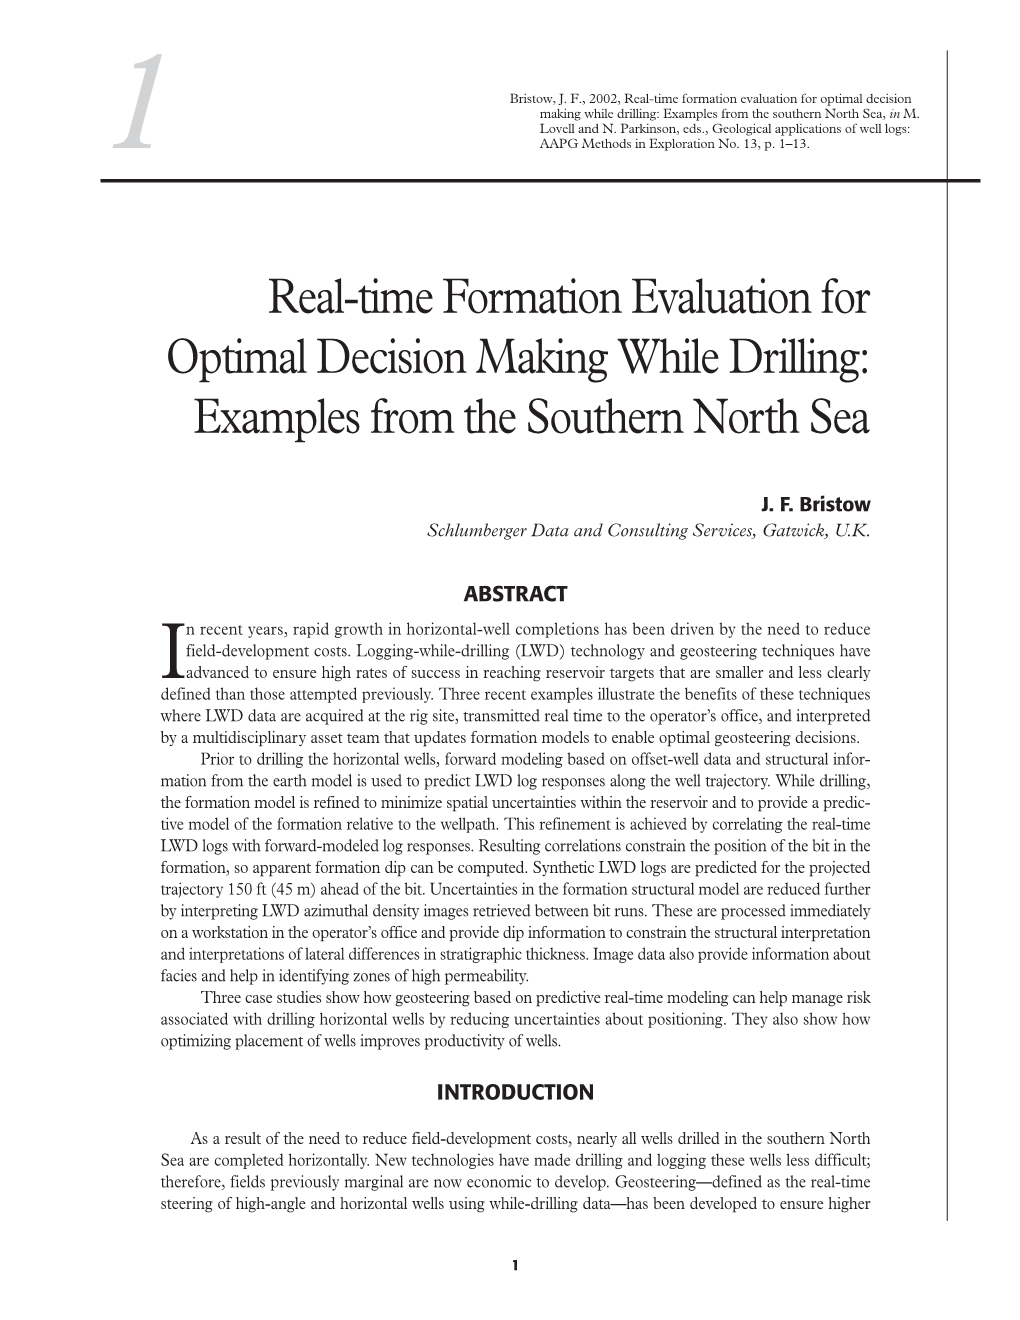 Real-Time Formation Evaluation for Optimal Decision Making While Drilling: Examples from the Southern North Sea, in M